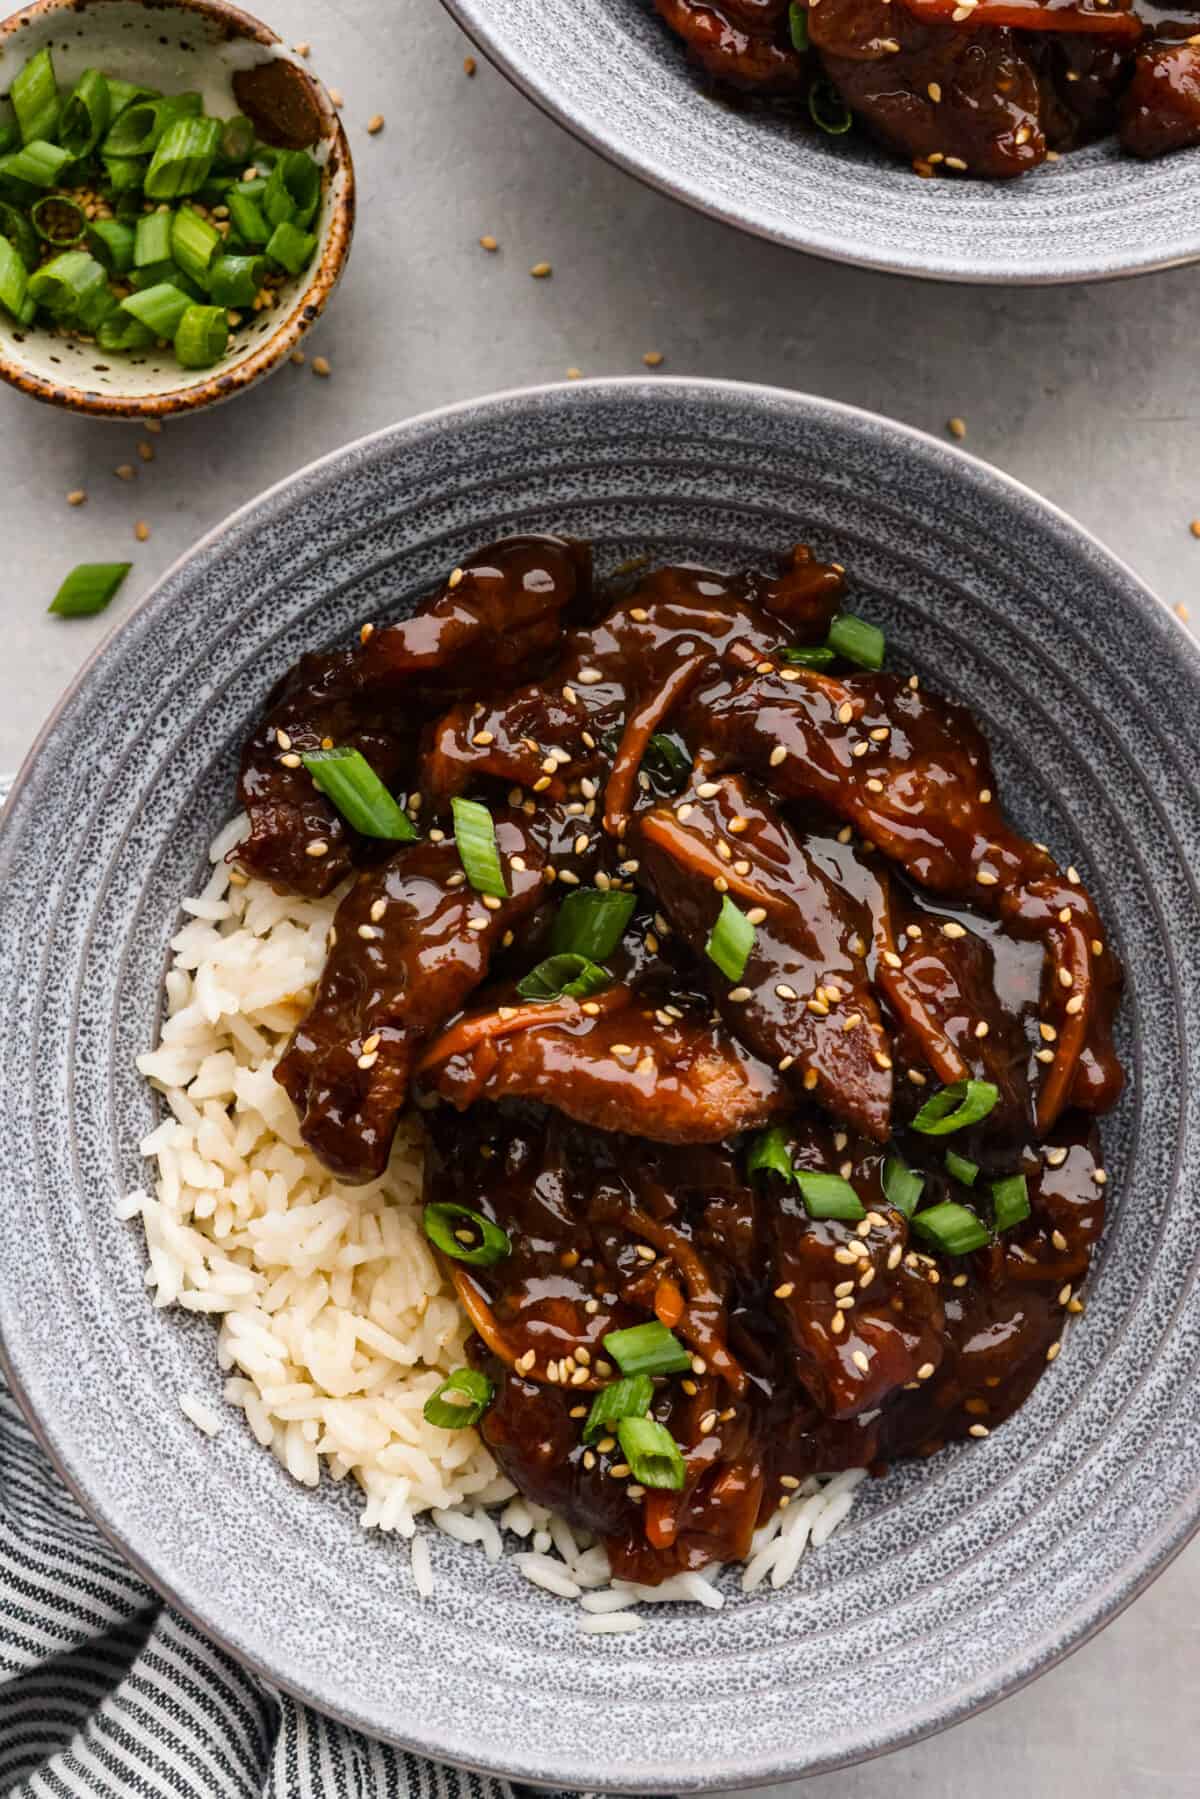 Overhead view of slow cooker Mongolian beef in a gray bowl over rice. Green onions and sesame seeds garnished on top.